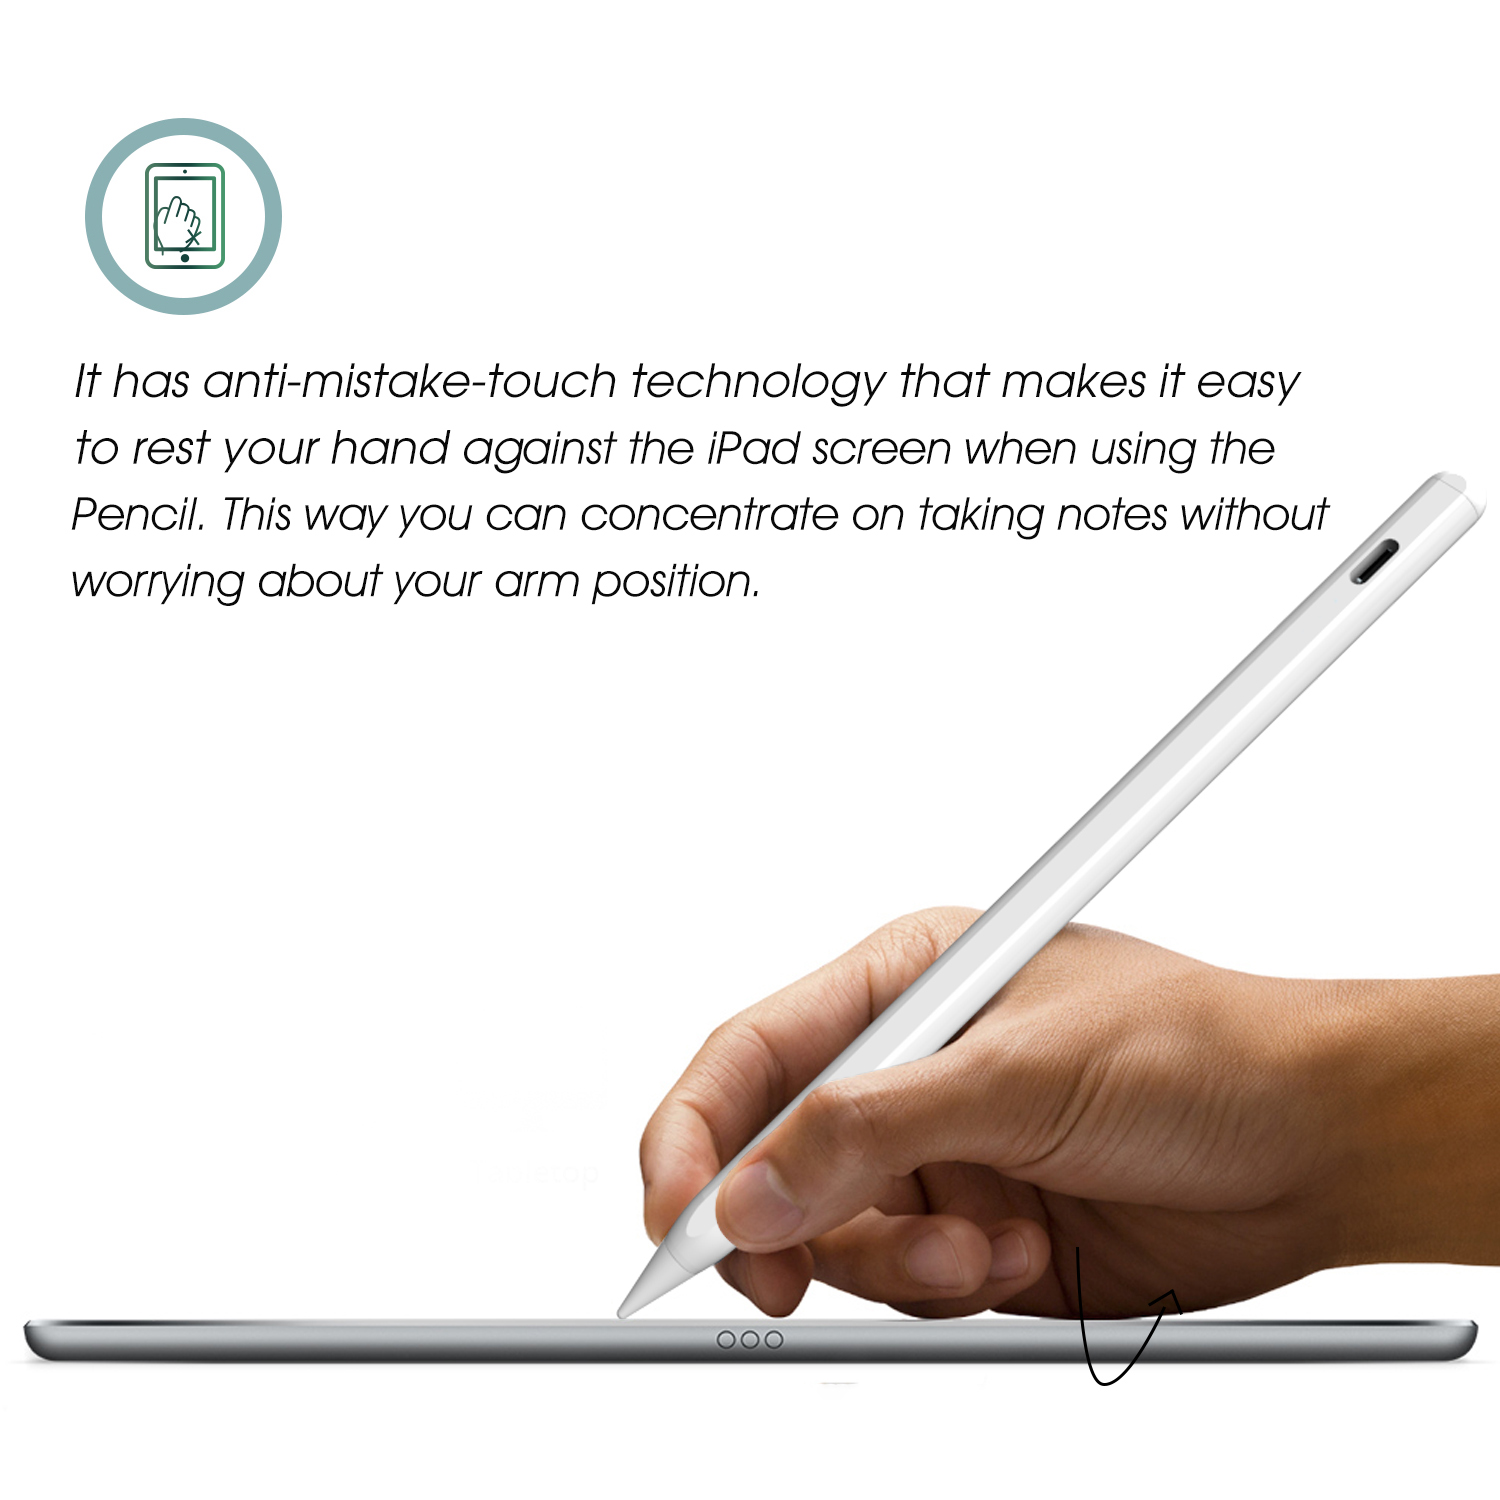 Bakeey-130mAh-Battery-Status-Display-Palm-Rejection-Active-Stylus-Pen-High-Sensitive-Capacitive-Pen--1898958-5